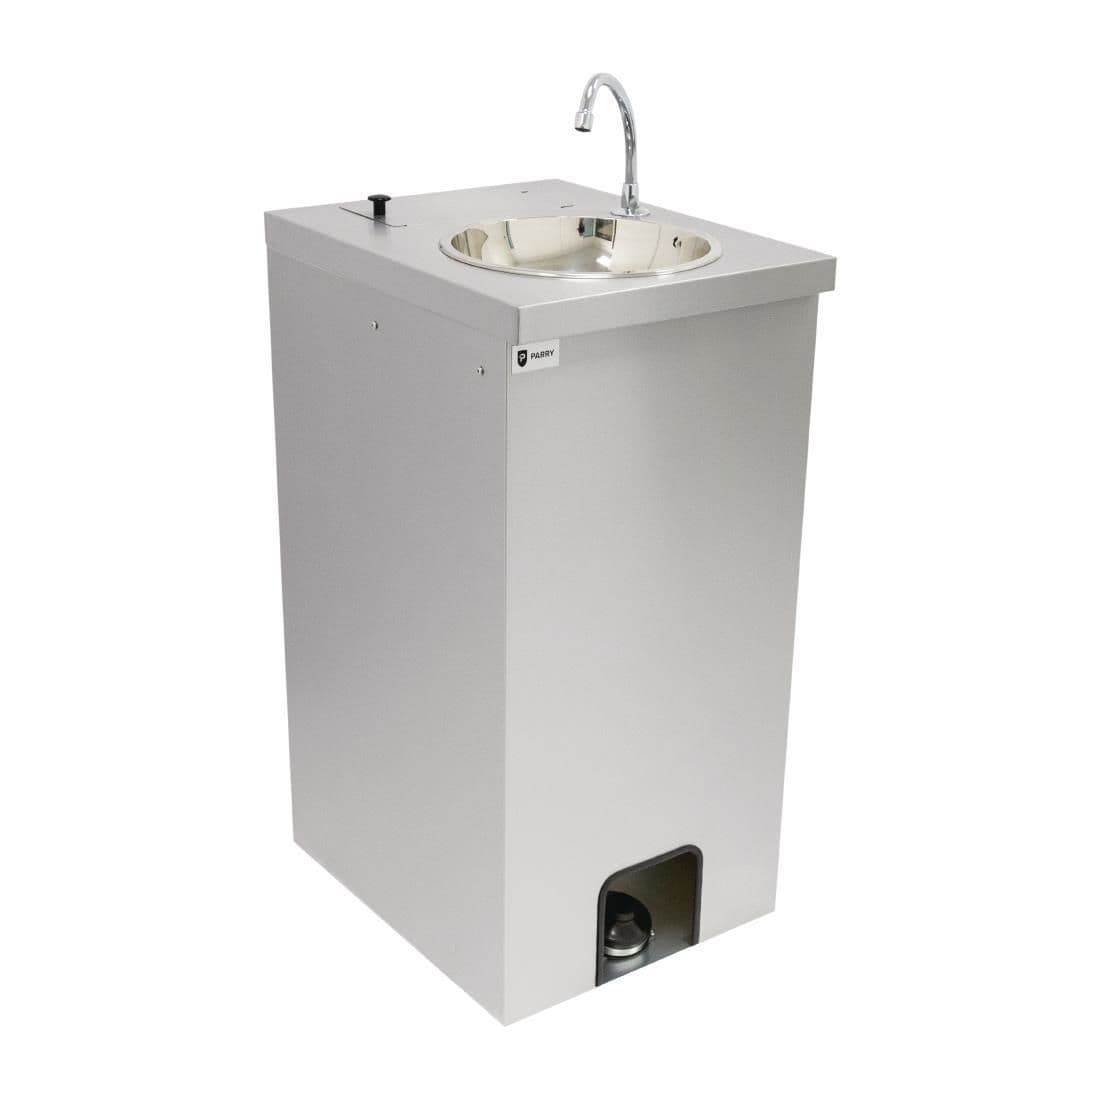 Parry Stainless Steel Mobile Sink MWBT